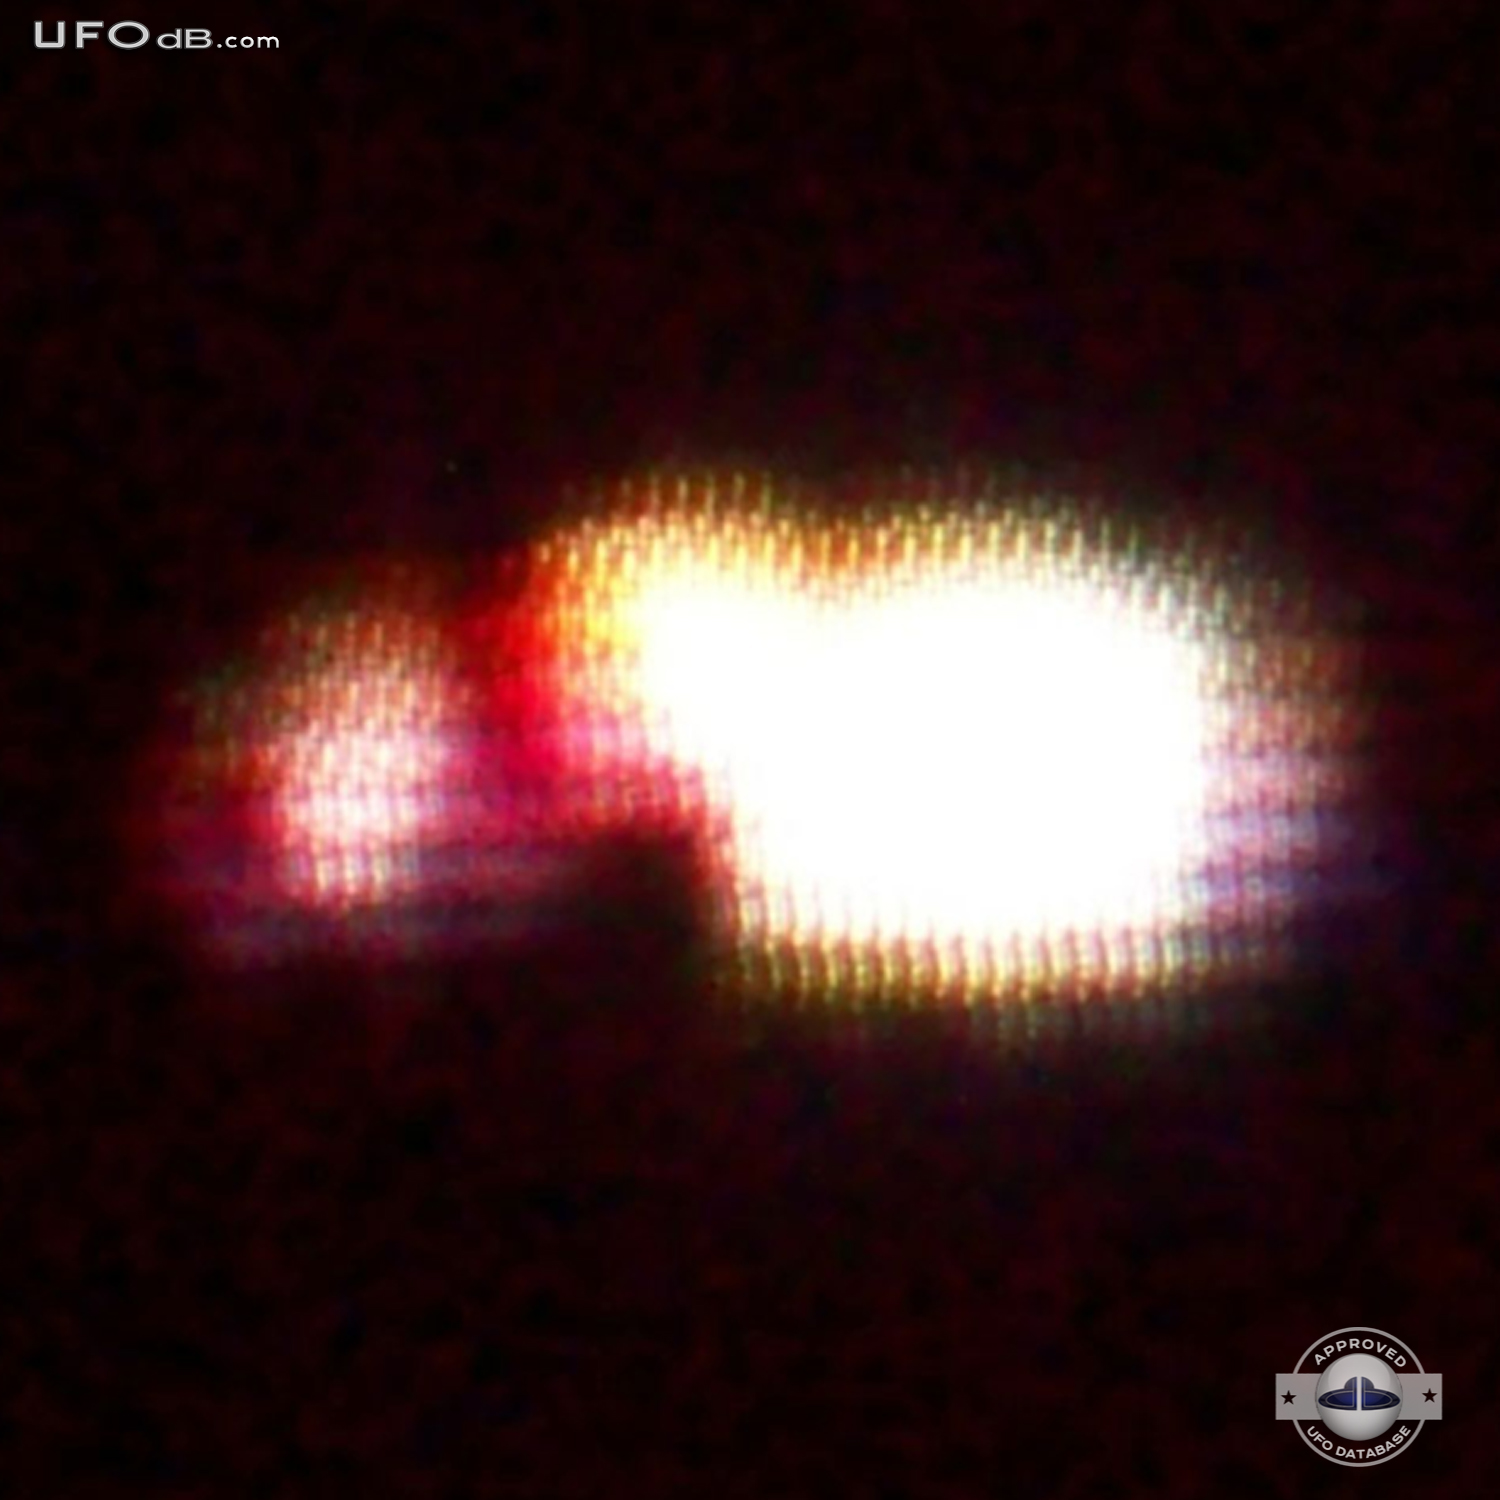 Silently out of nowhere | UFO passing overhead in Kentucky, USA | 2011 UFO Picture #364-3